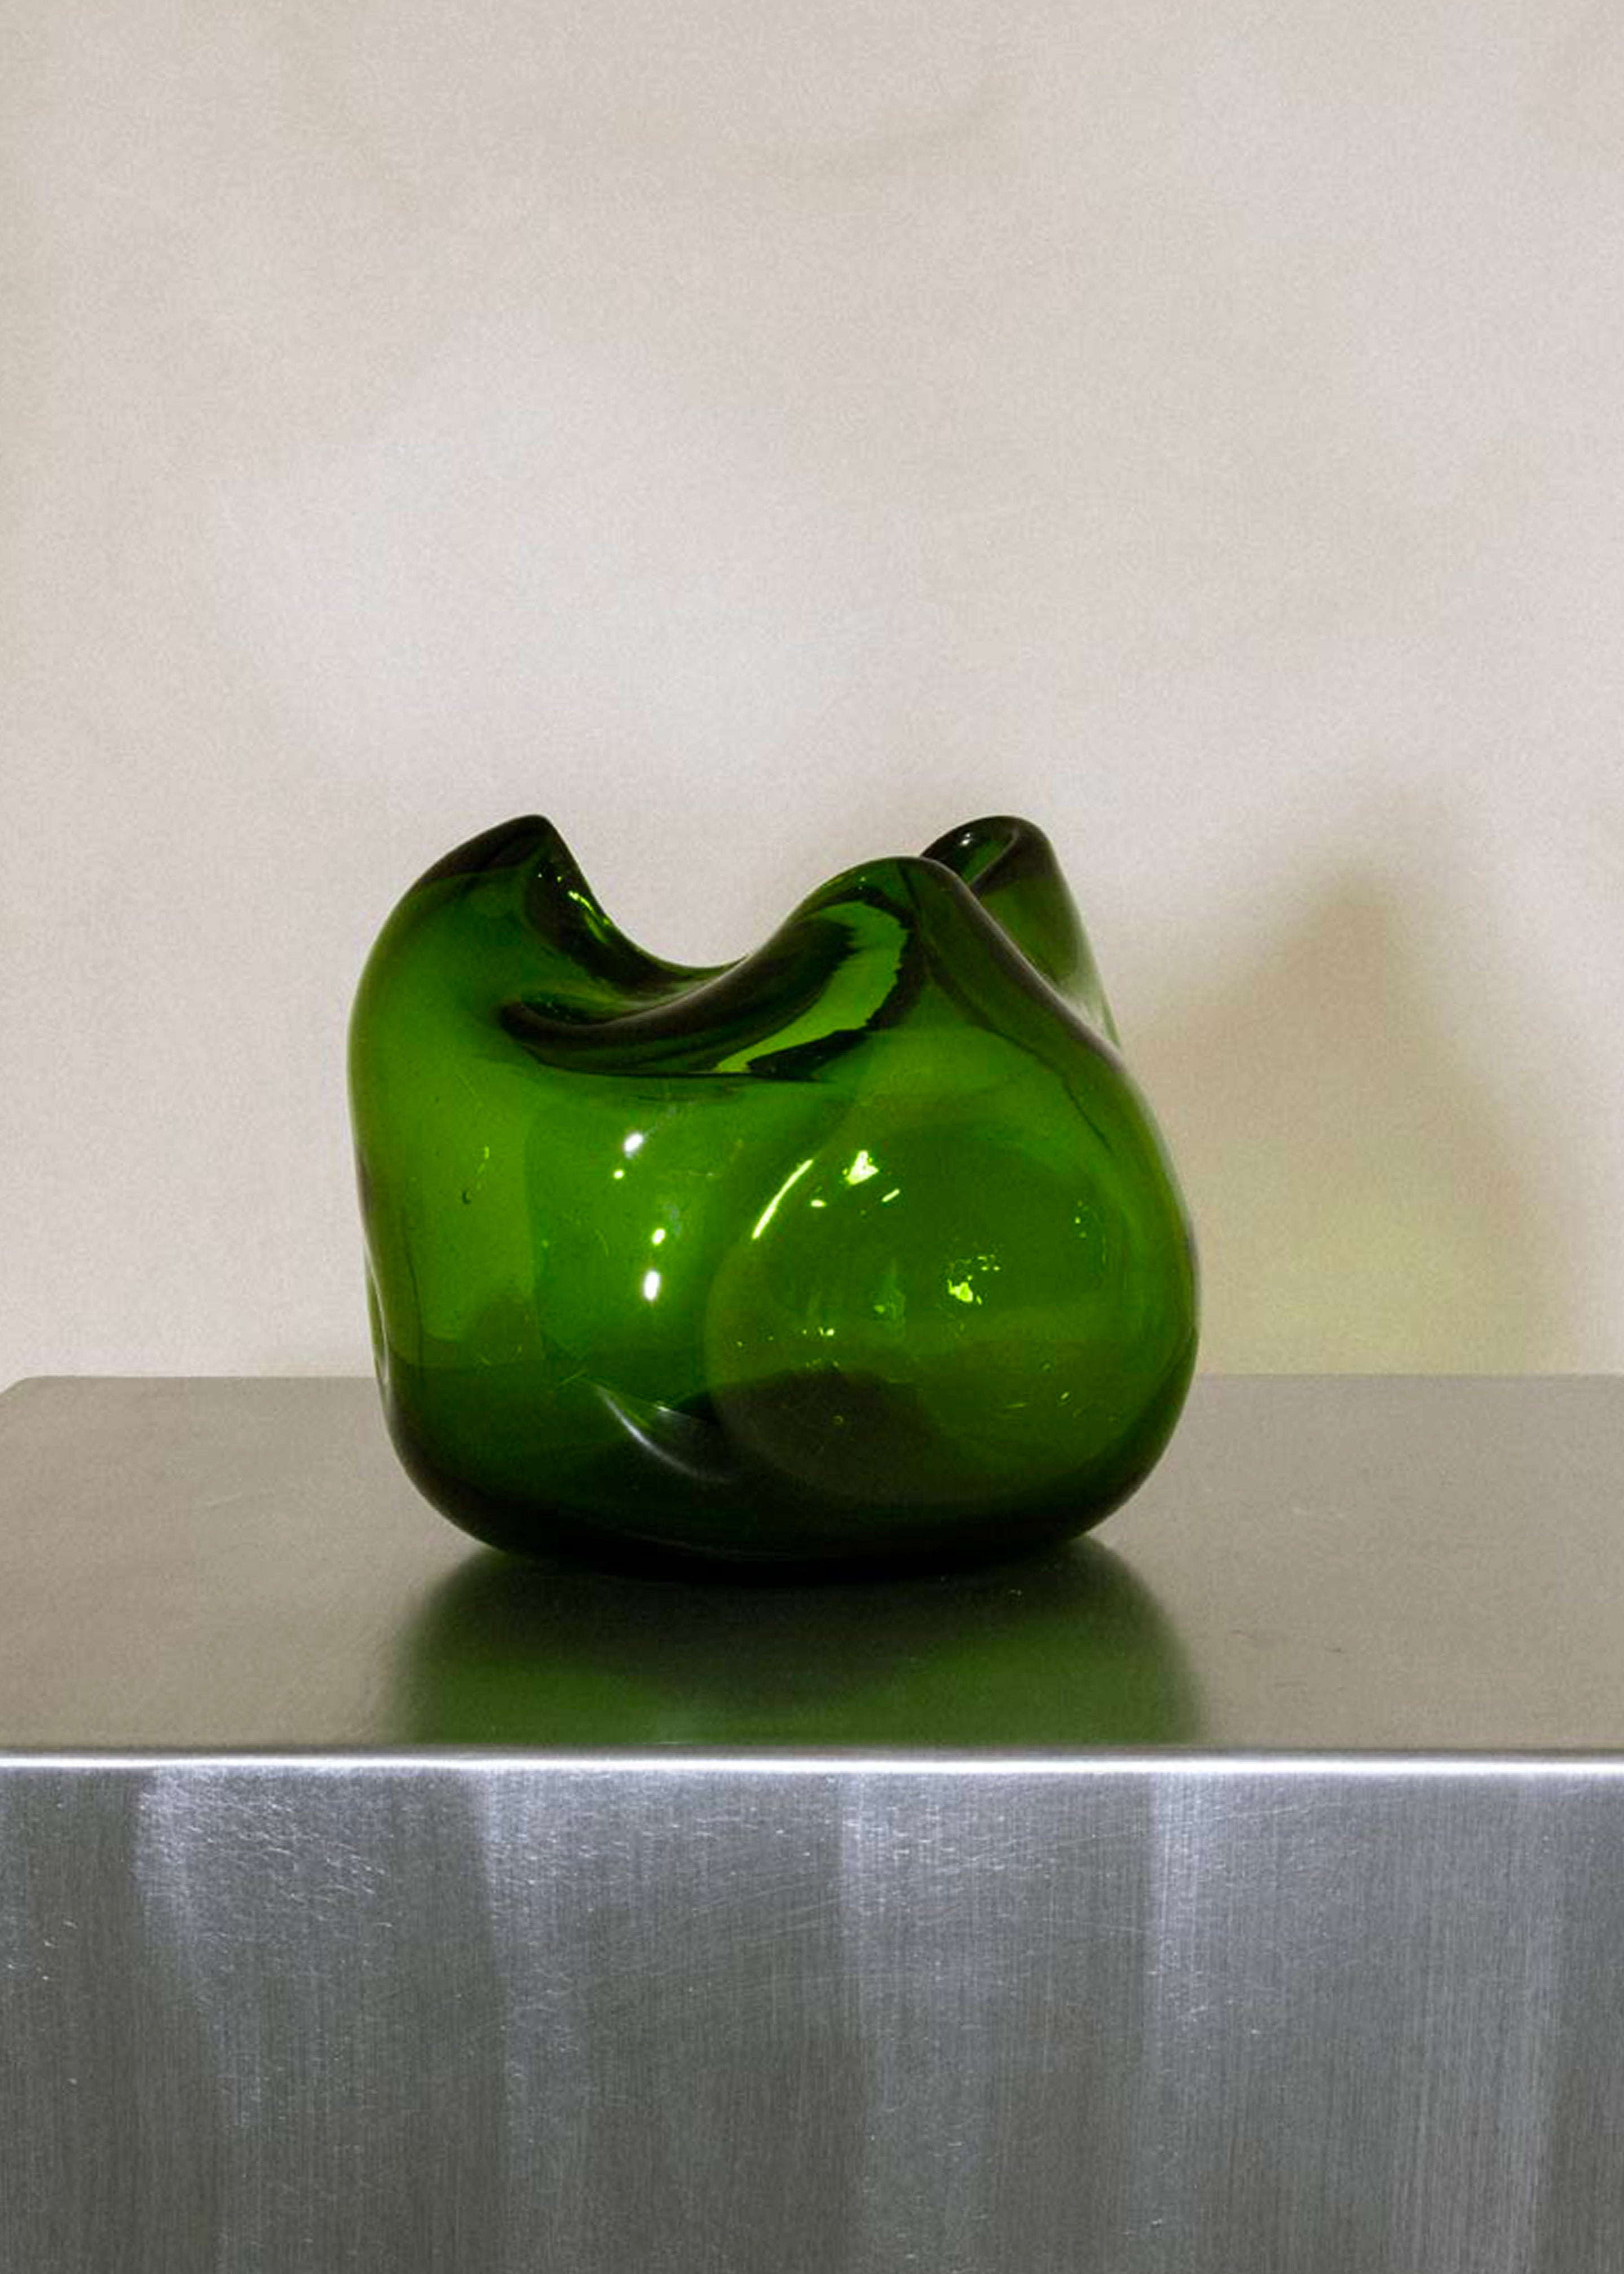 Completedworks The Bubble to End all Bubbles Vase - Green - 2